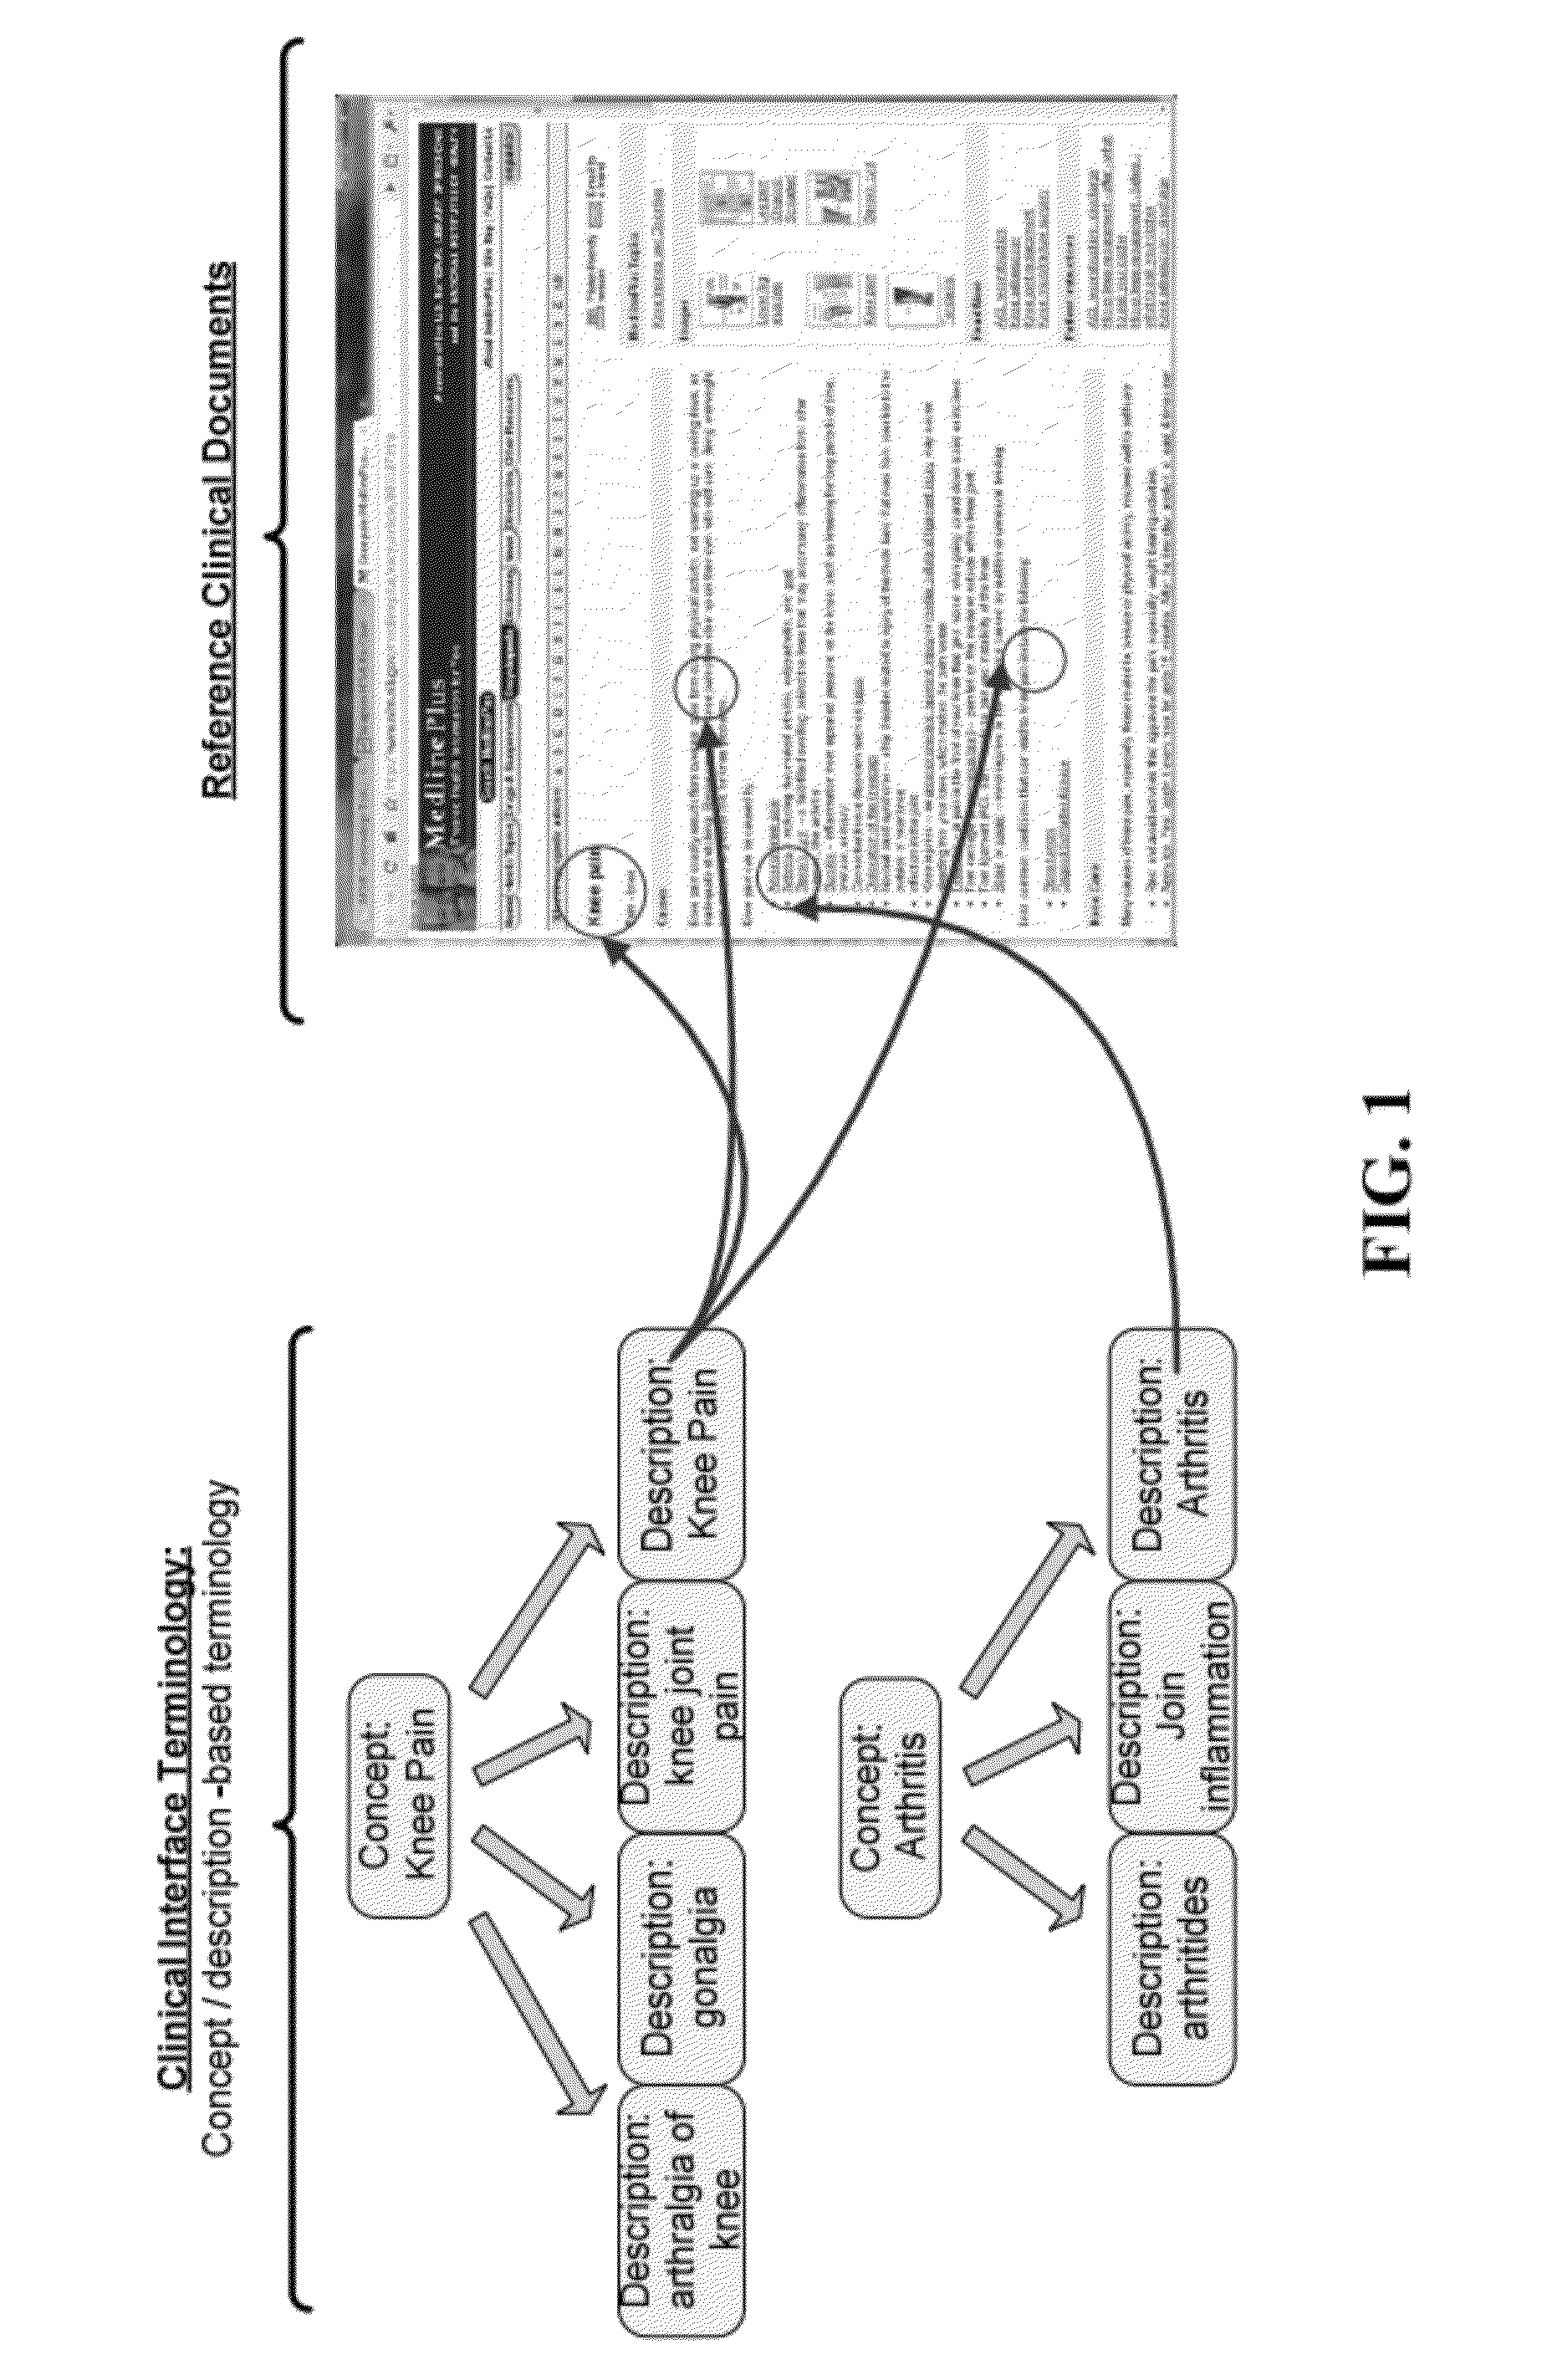 System and process for concept tagging and content retrieval